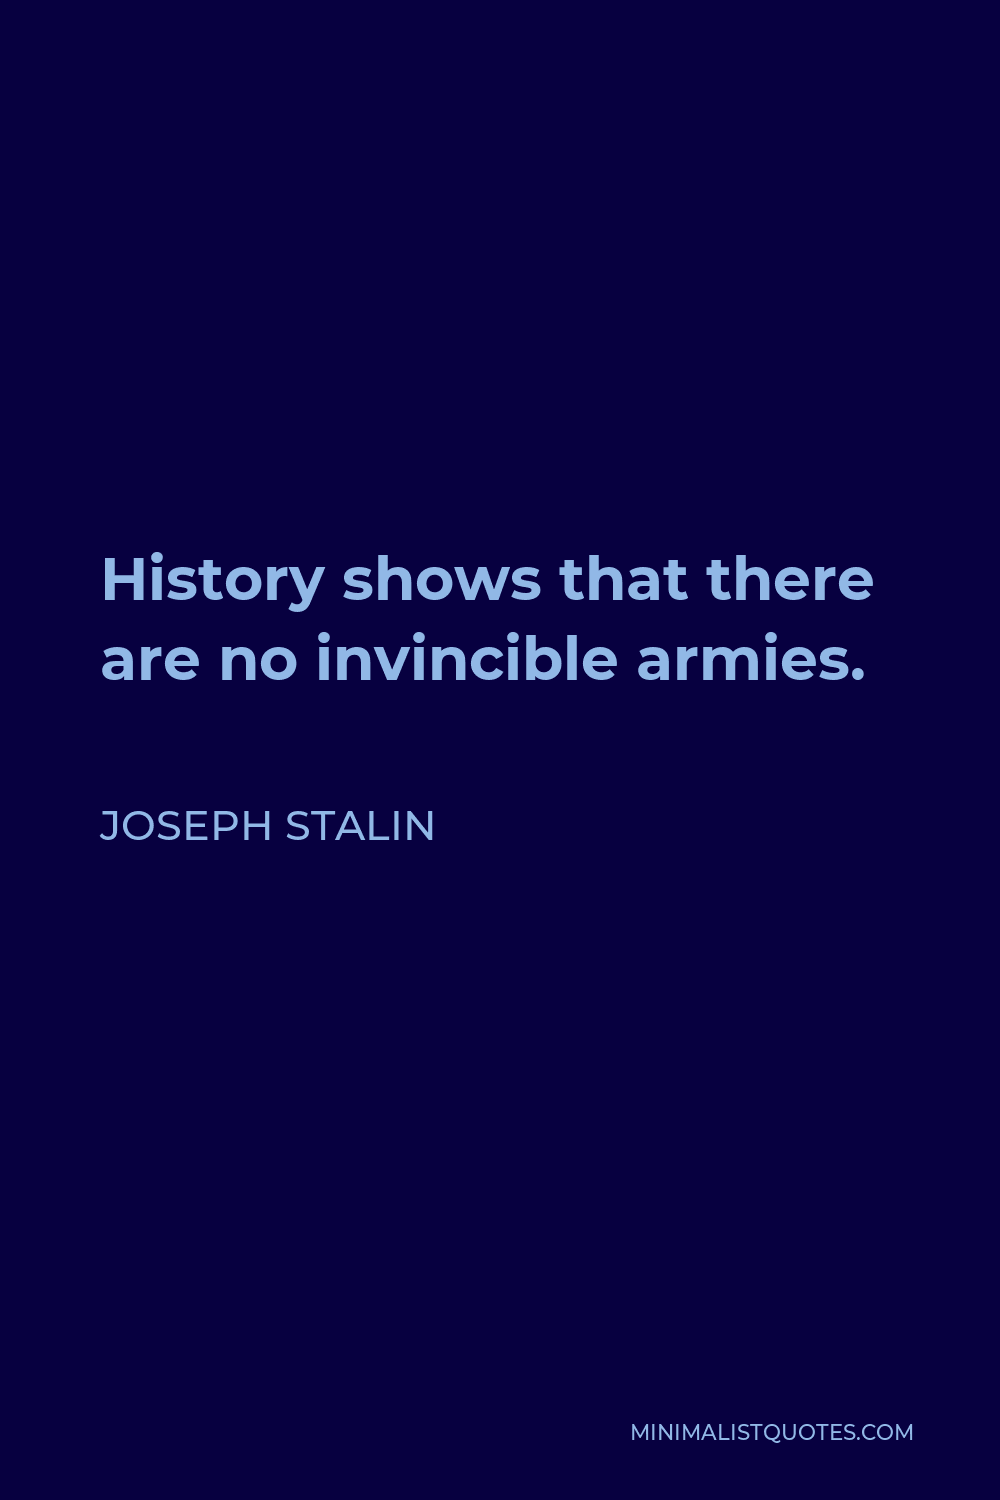 Joseph Stalin Quote - History shows that there are no invincible armies.